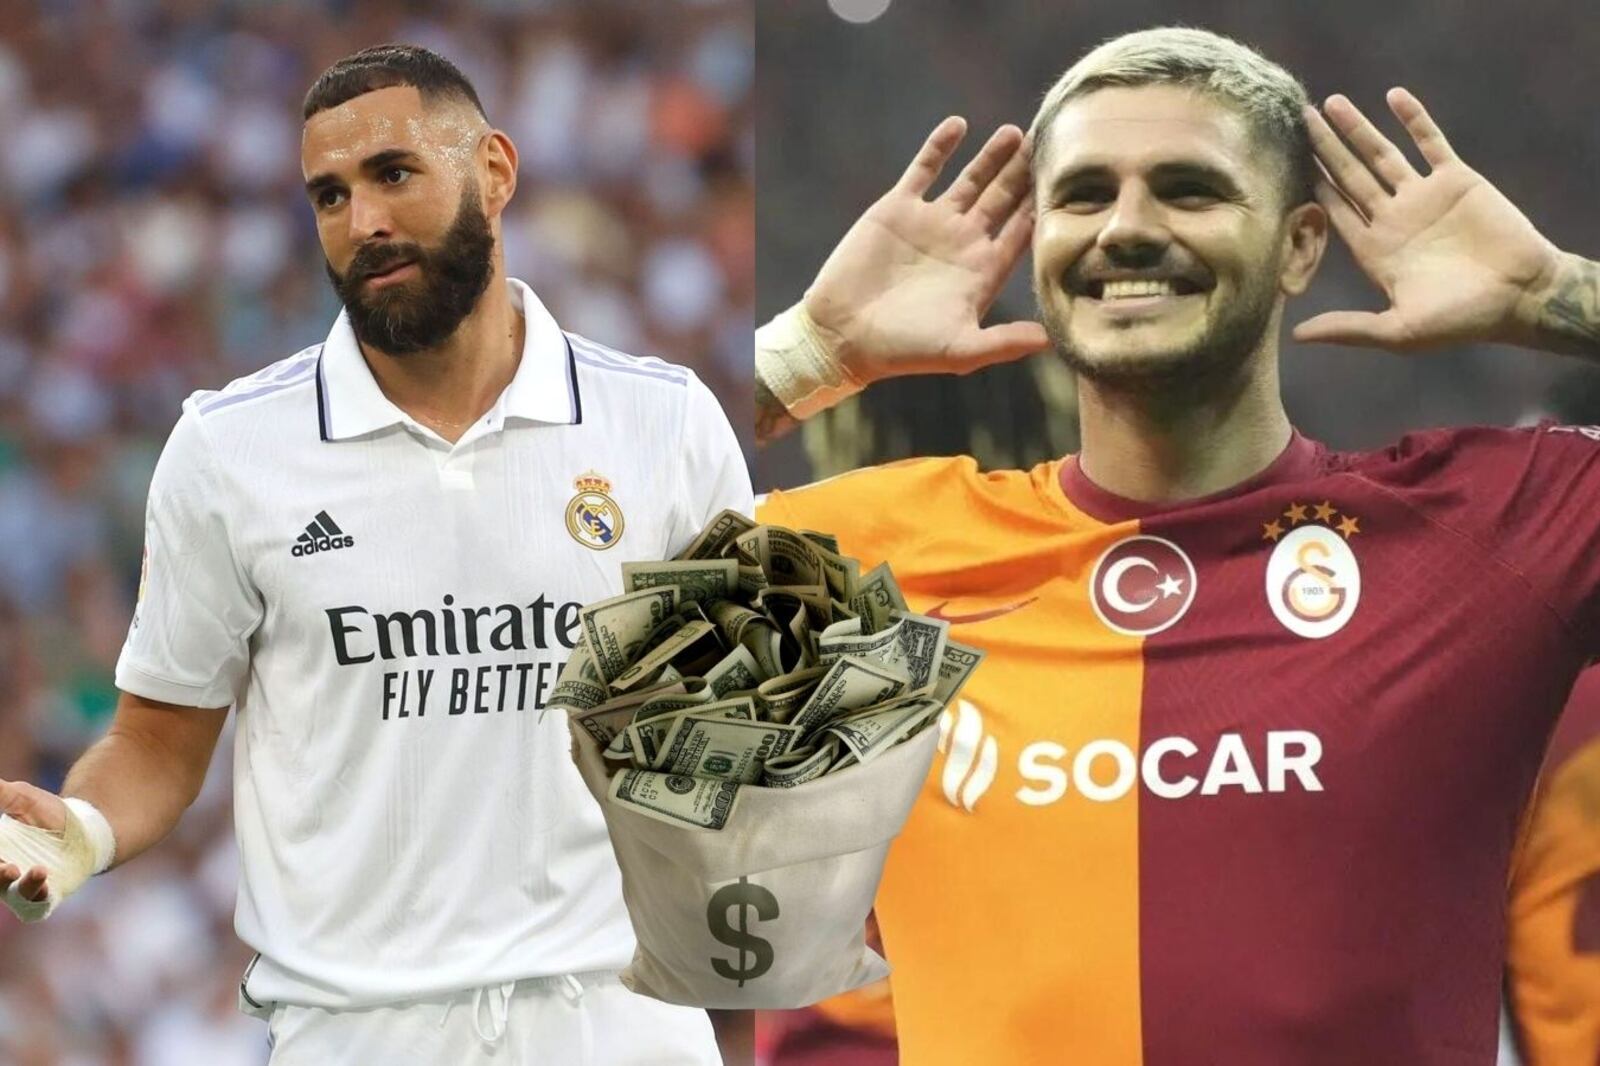 While Benzema earned 13 million, what Real Madrid could pay Icardi